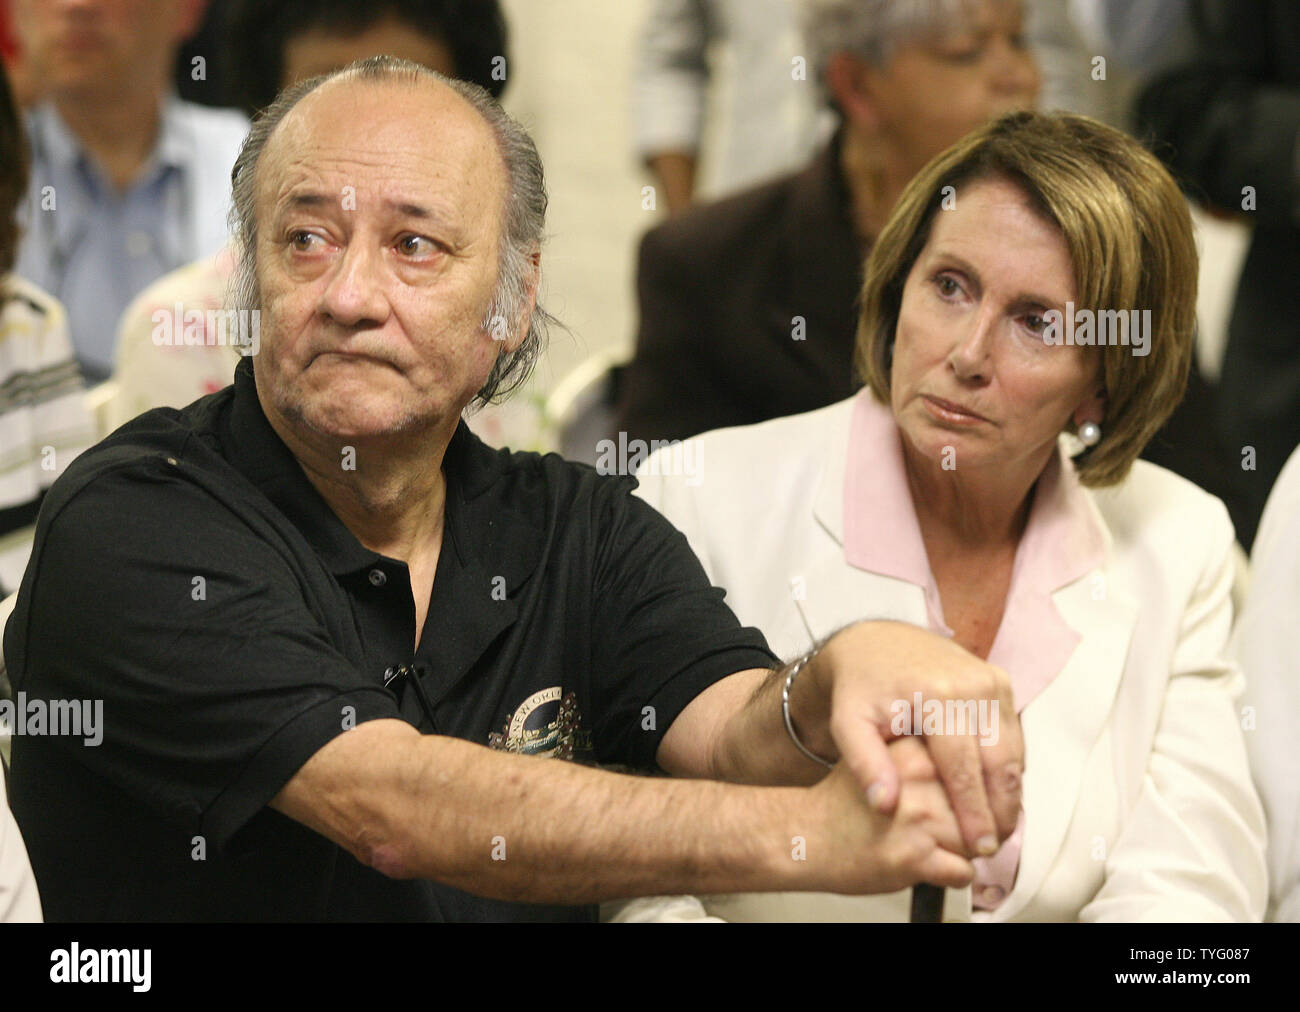 Ernie Novello and U.S. House Speaker Nancy Pelosi listen to a member of the audience at the Unity of Greater New Orleans, a advocacy group for the homeless, during a congressional tour of post-Katrina New Orleans as they gauge the rebuilding progress since Hurricane Katrina. Novello had been homeless until coming to the center.   (UPI Photo/A.J. Sisco) Stock Photo